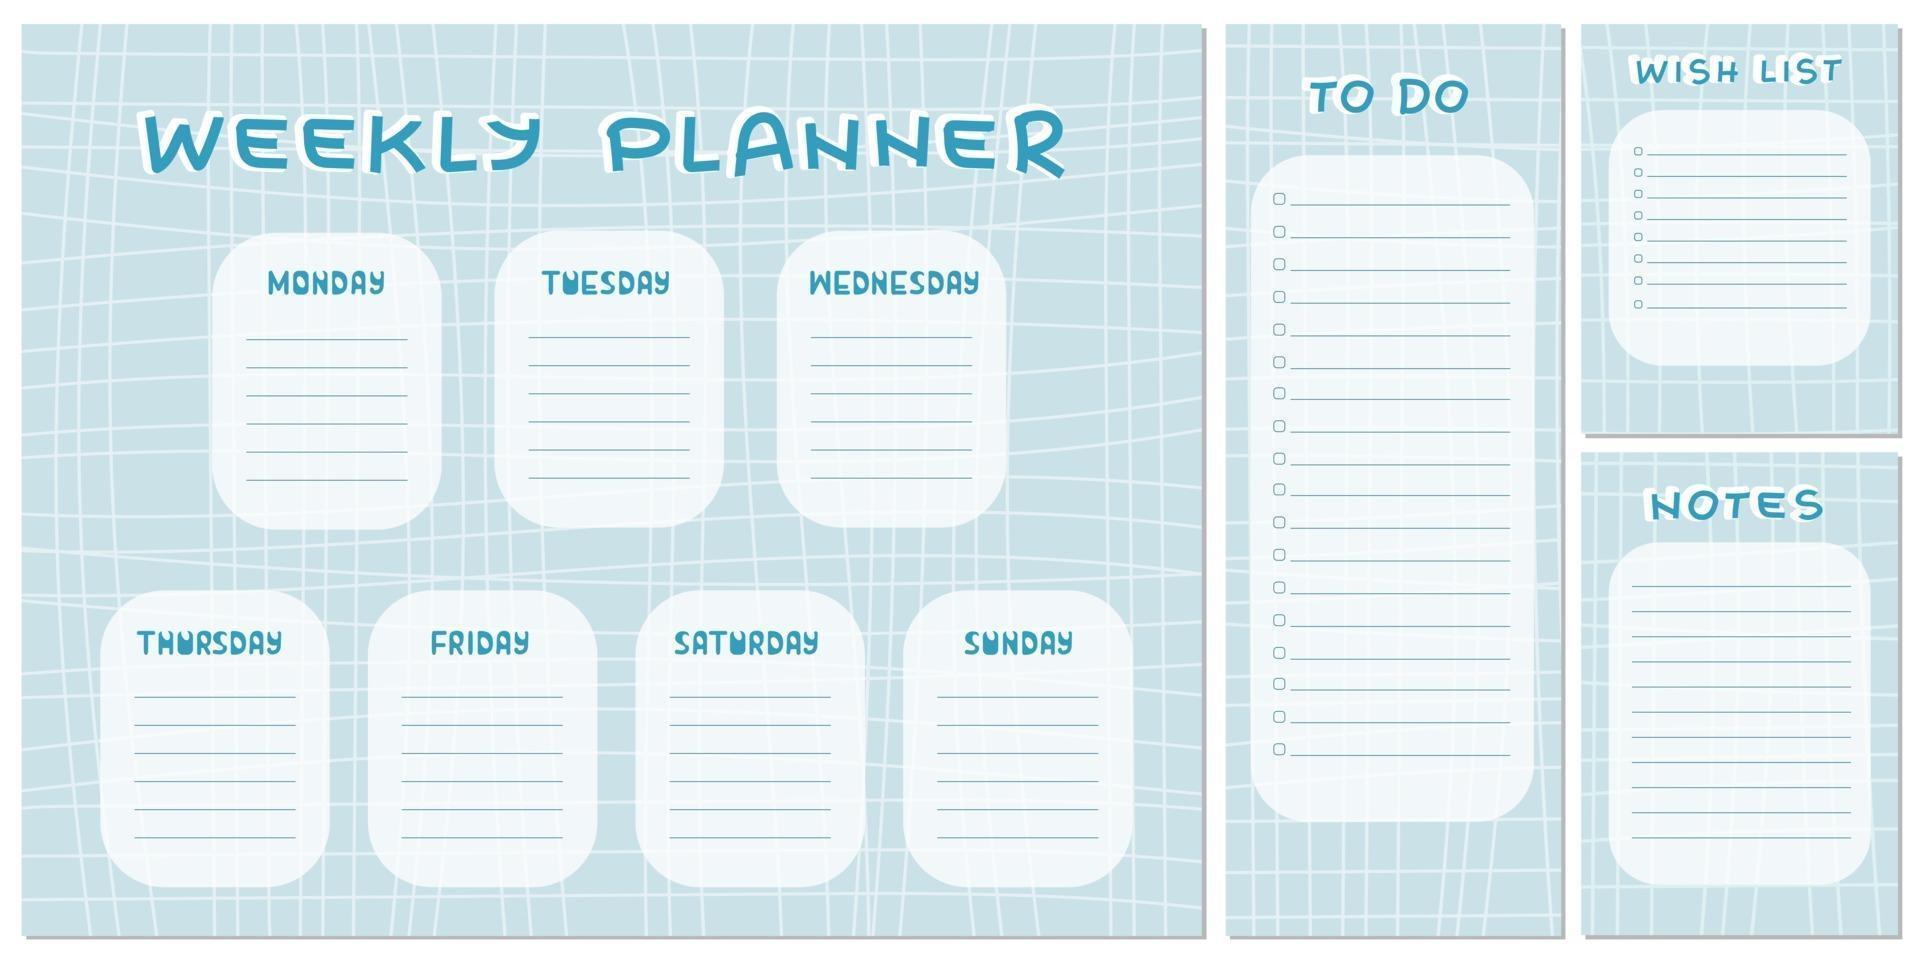 Weekly planner, To do list, Notes, Wish list on blue and white squared pattern vector